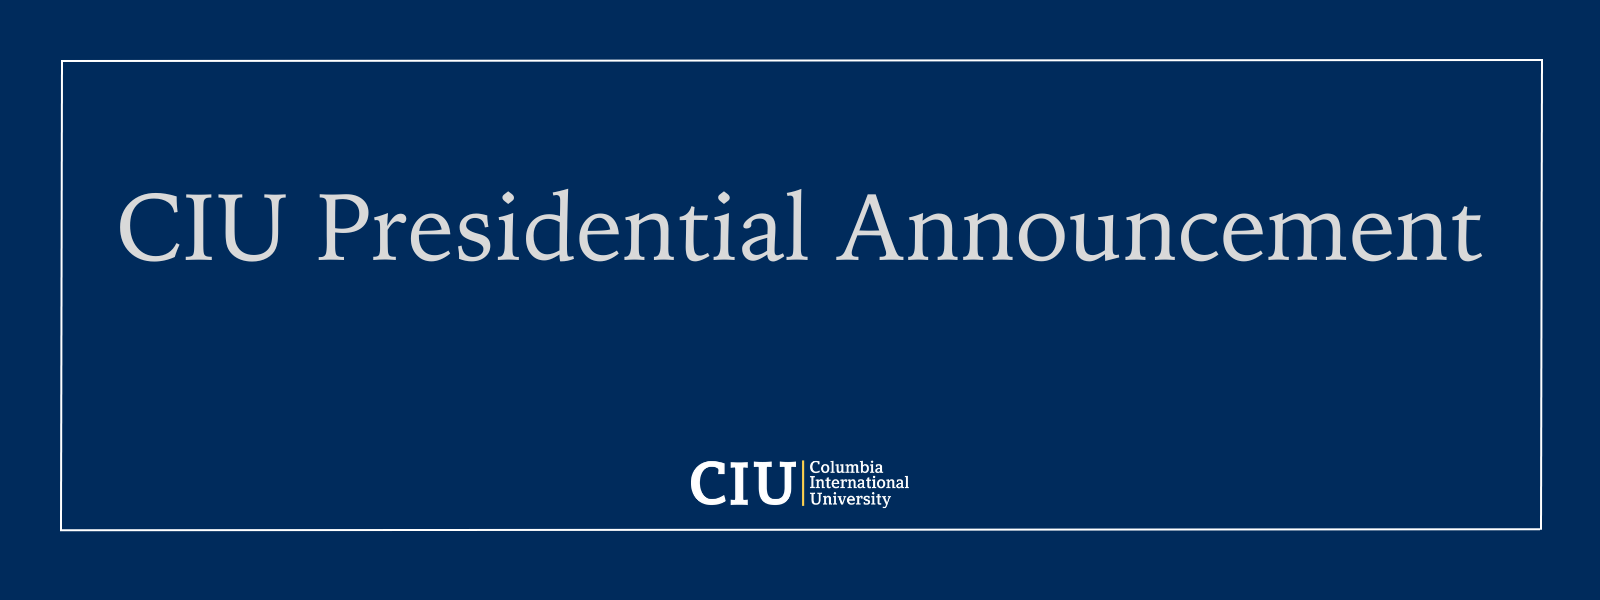 Blue box with οƵ logo and text: οƵ Presidential Announcement